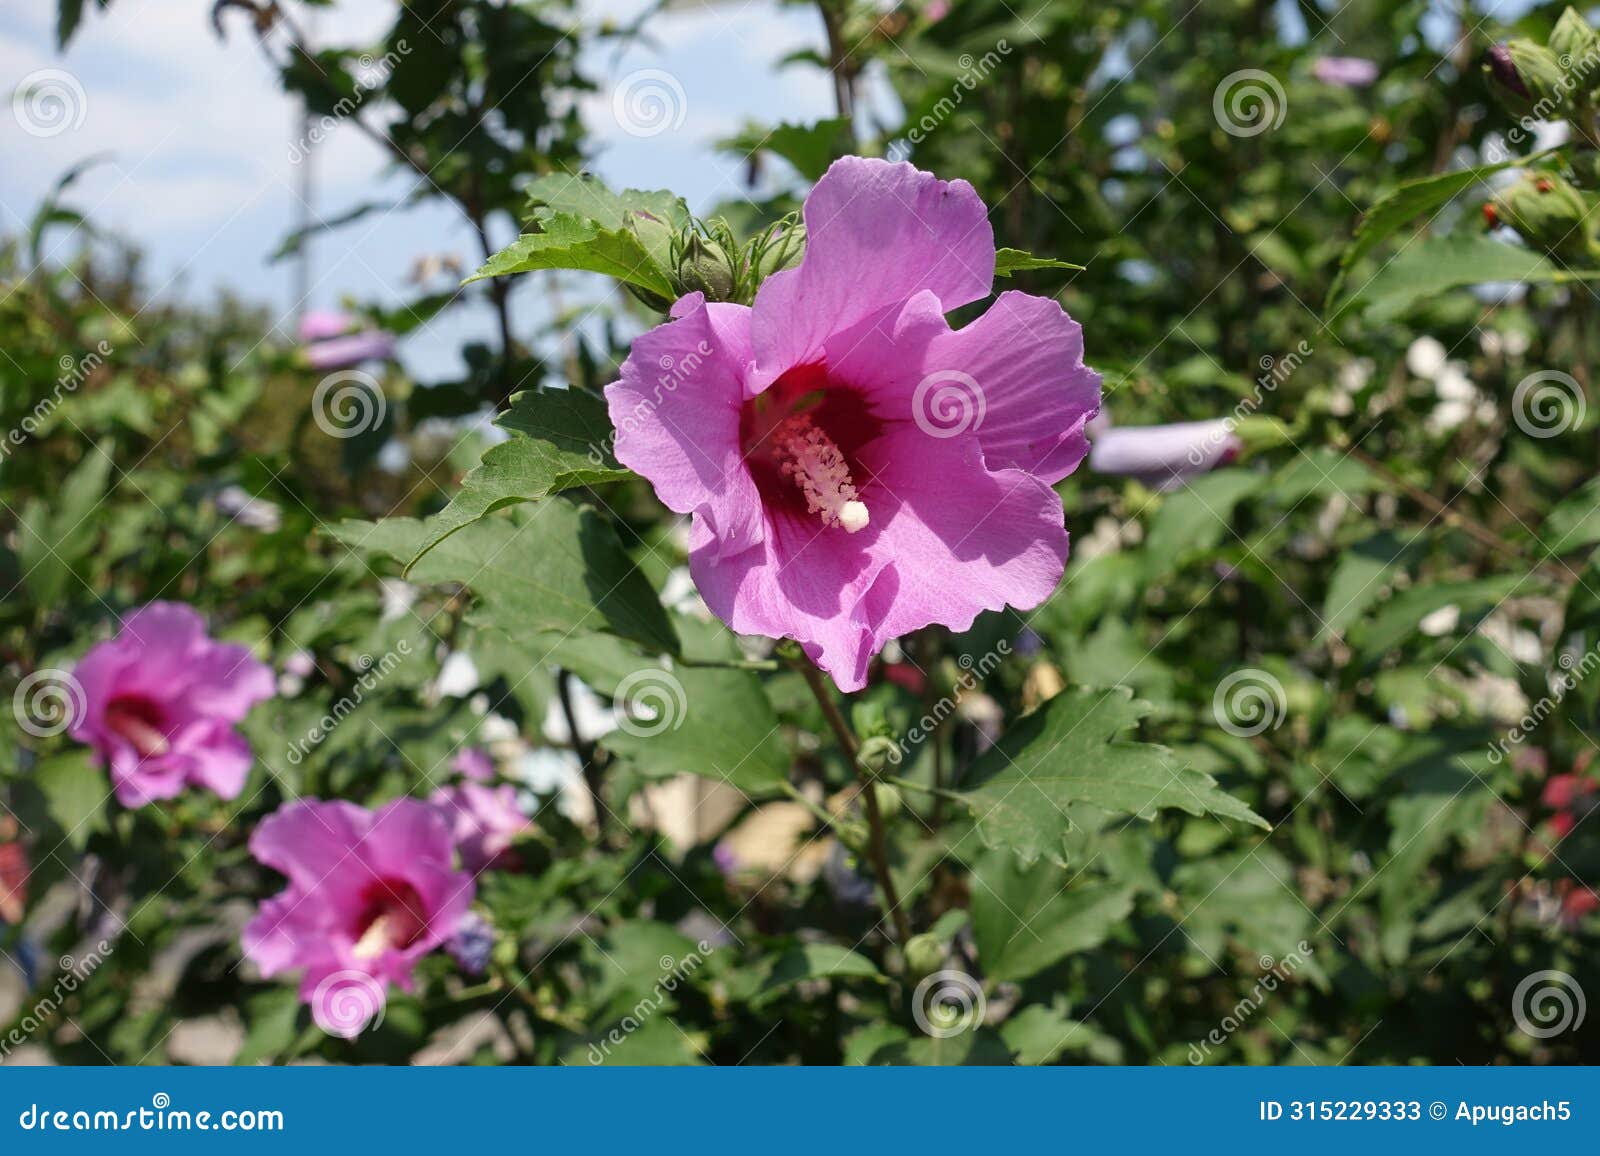 three pink flowers in the leafage of hibiscus syriacus in august